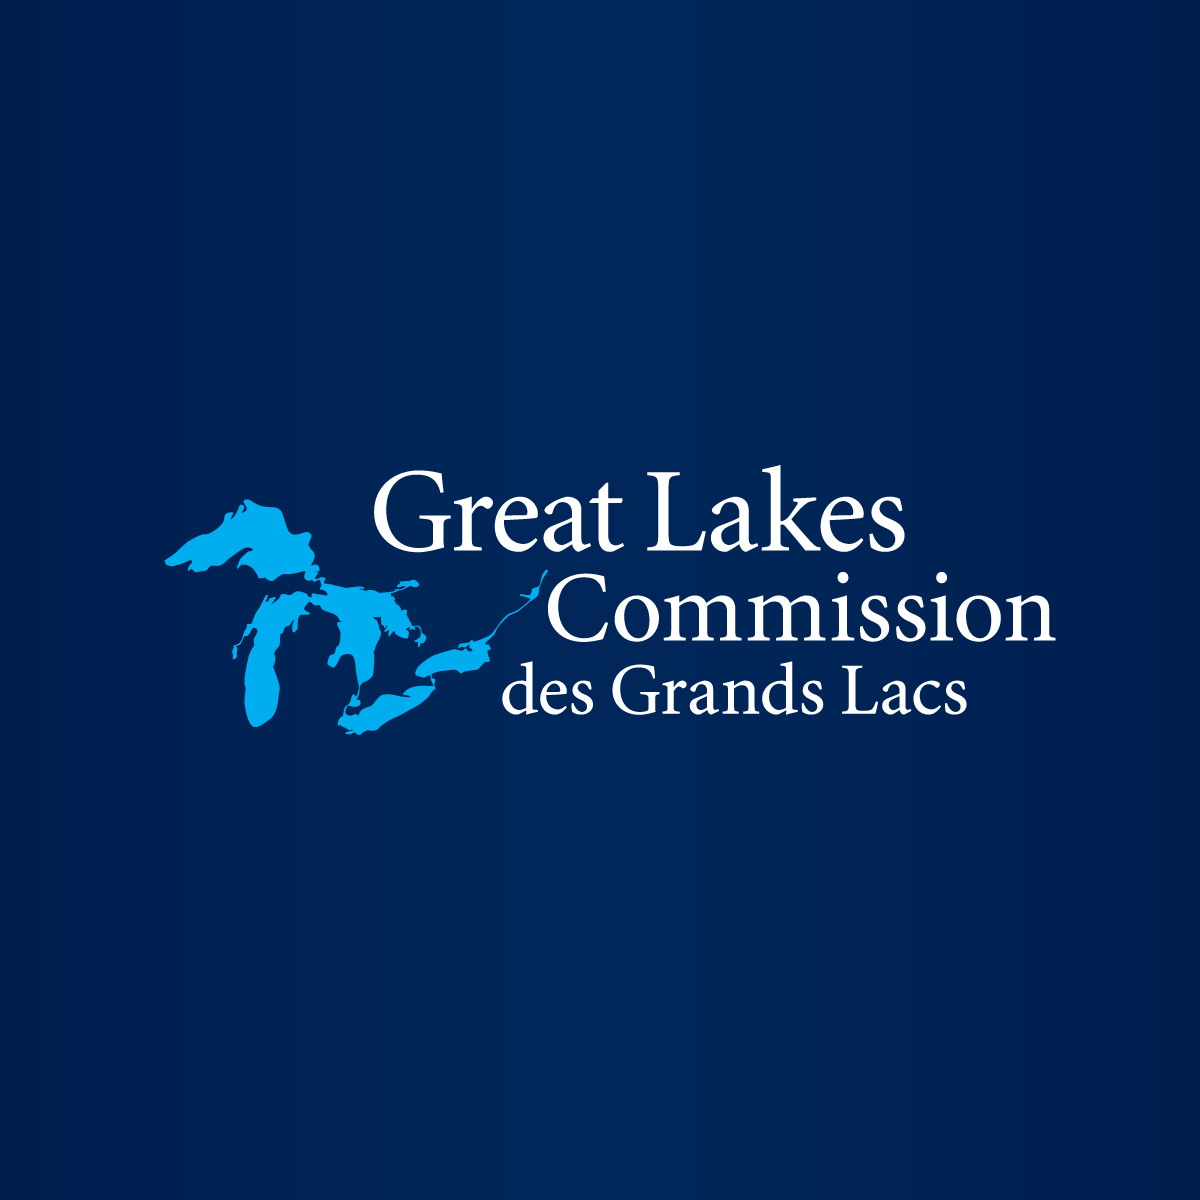 report shows great lakes seaway benefits indiana the most